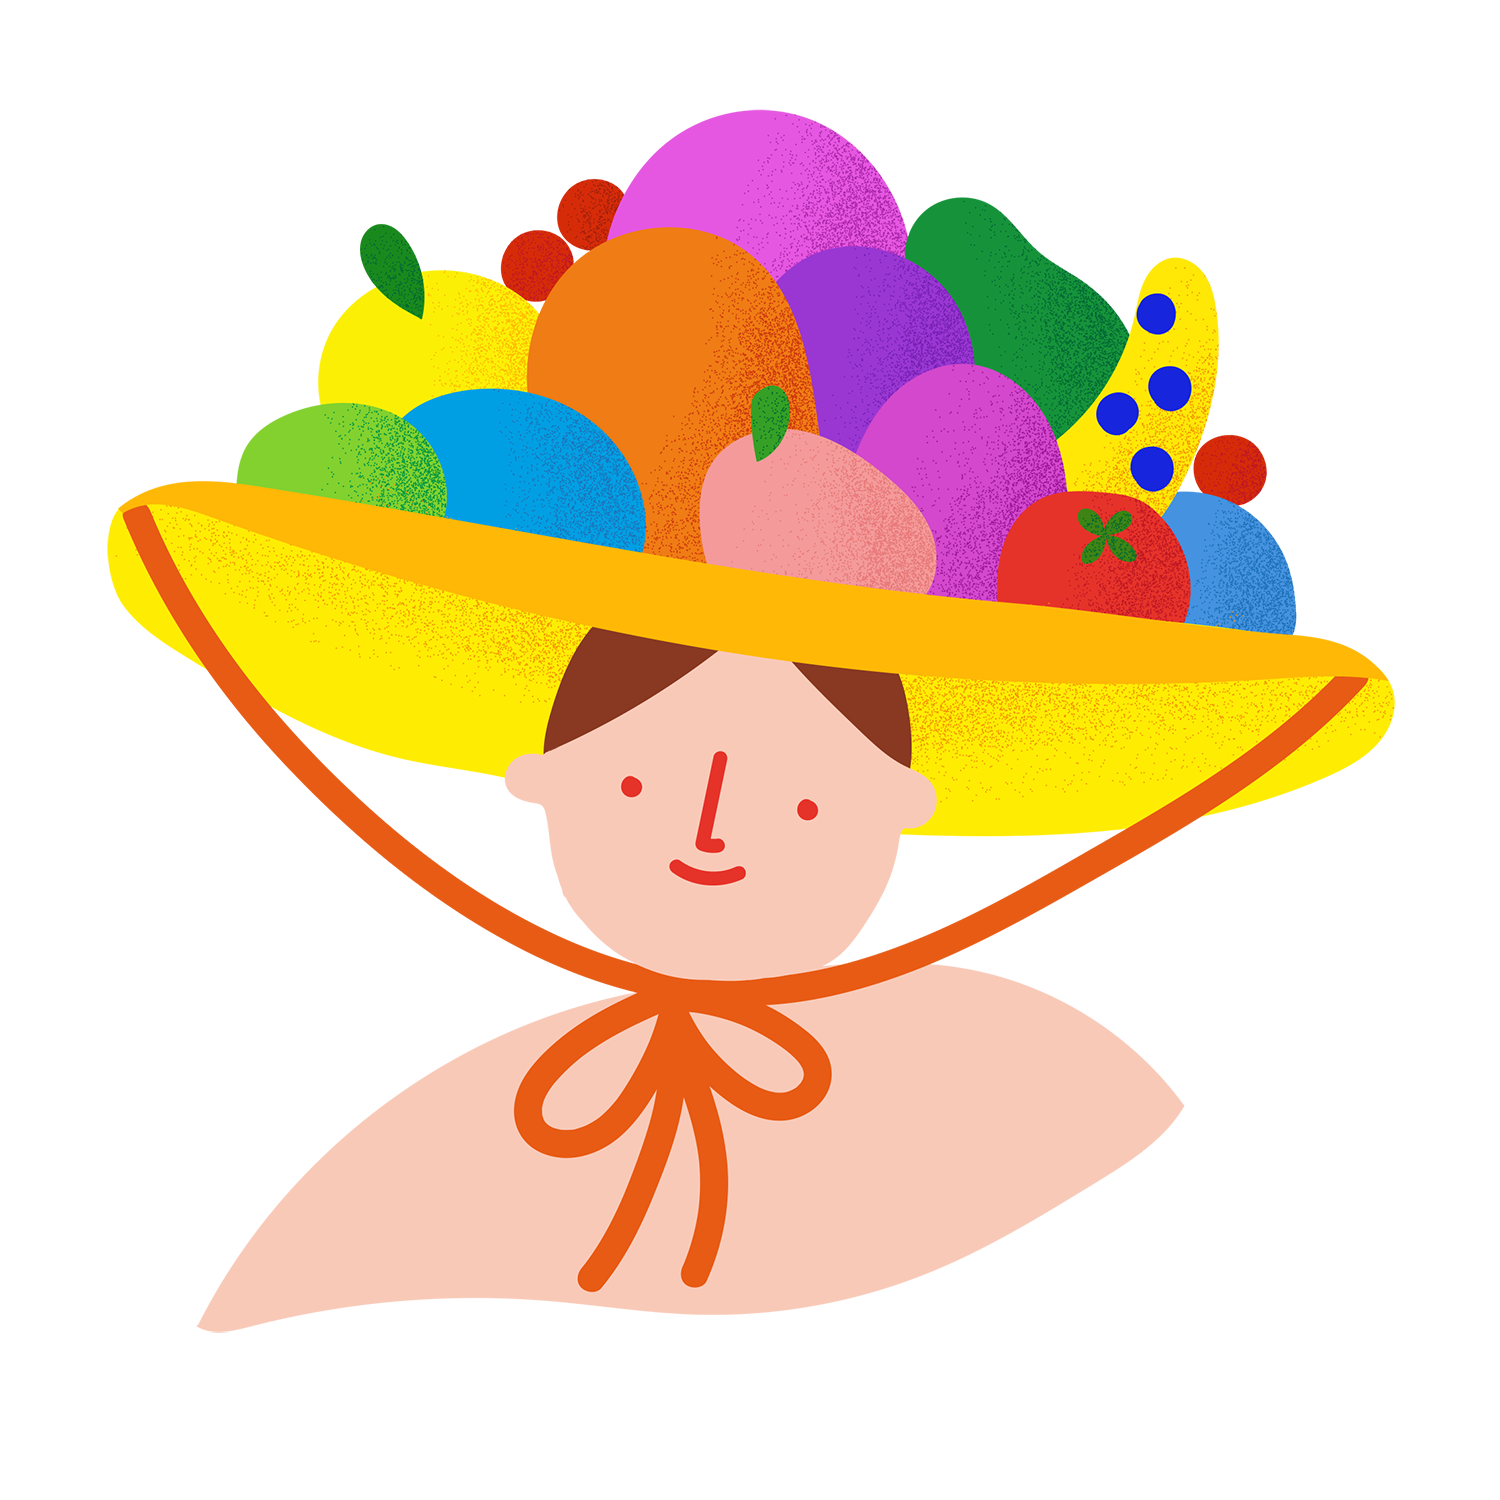 An illustration of a woman wearing a hat bursting with colorful fruits